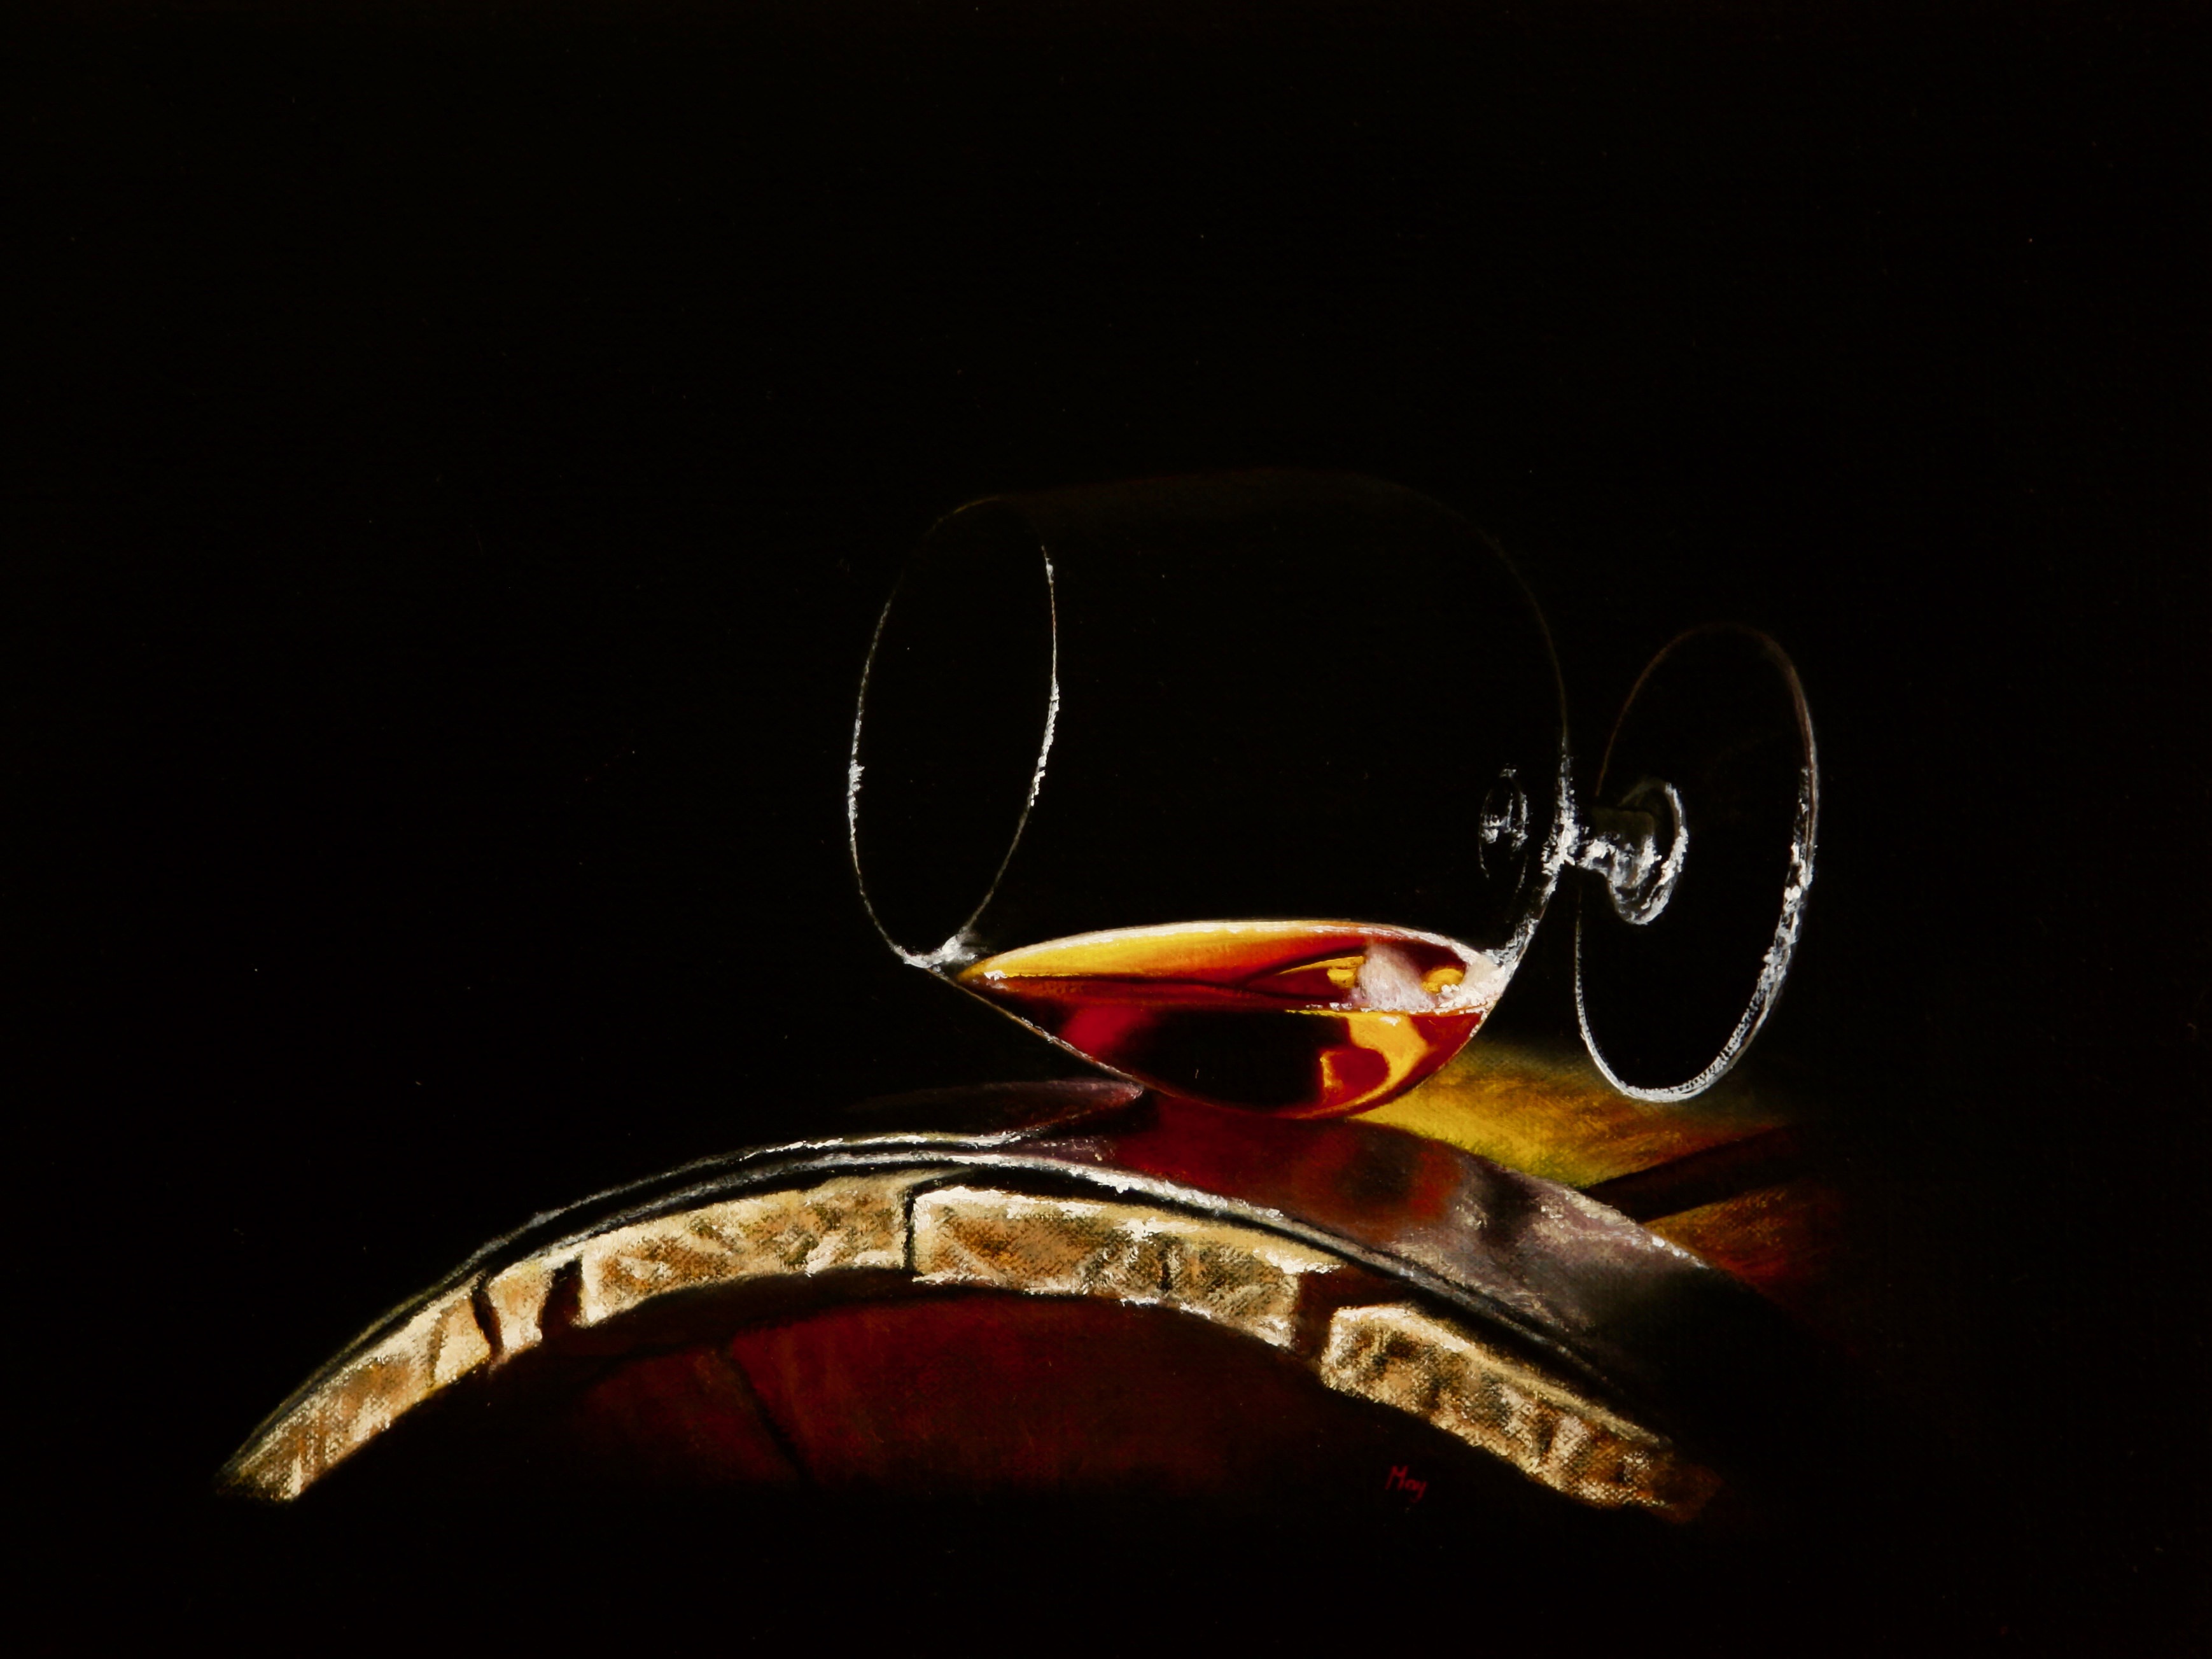 Guilty Pleasures No 2 by Damir May oil on canvas still life